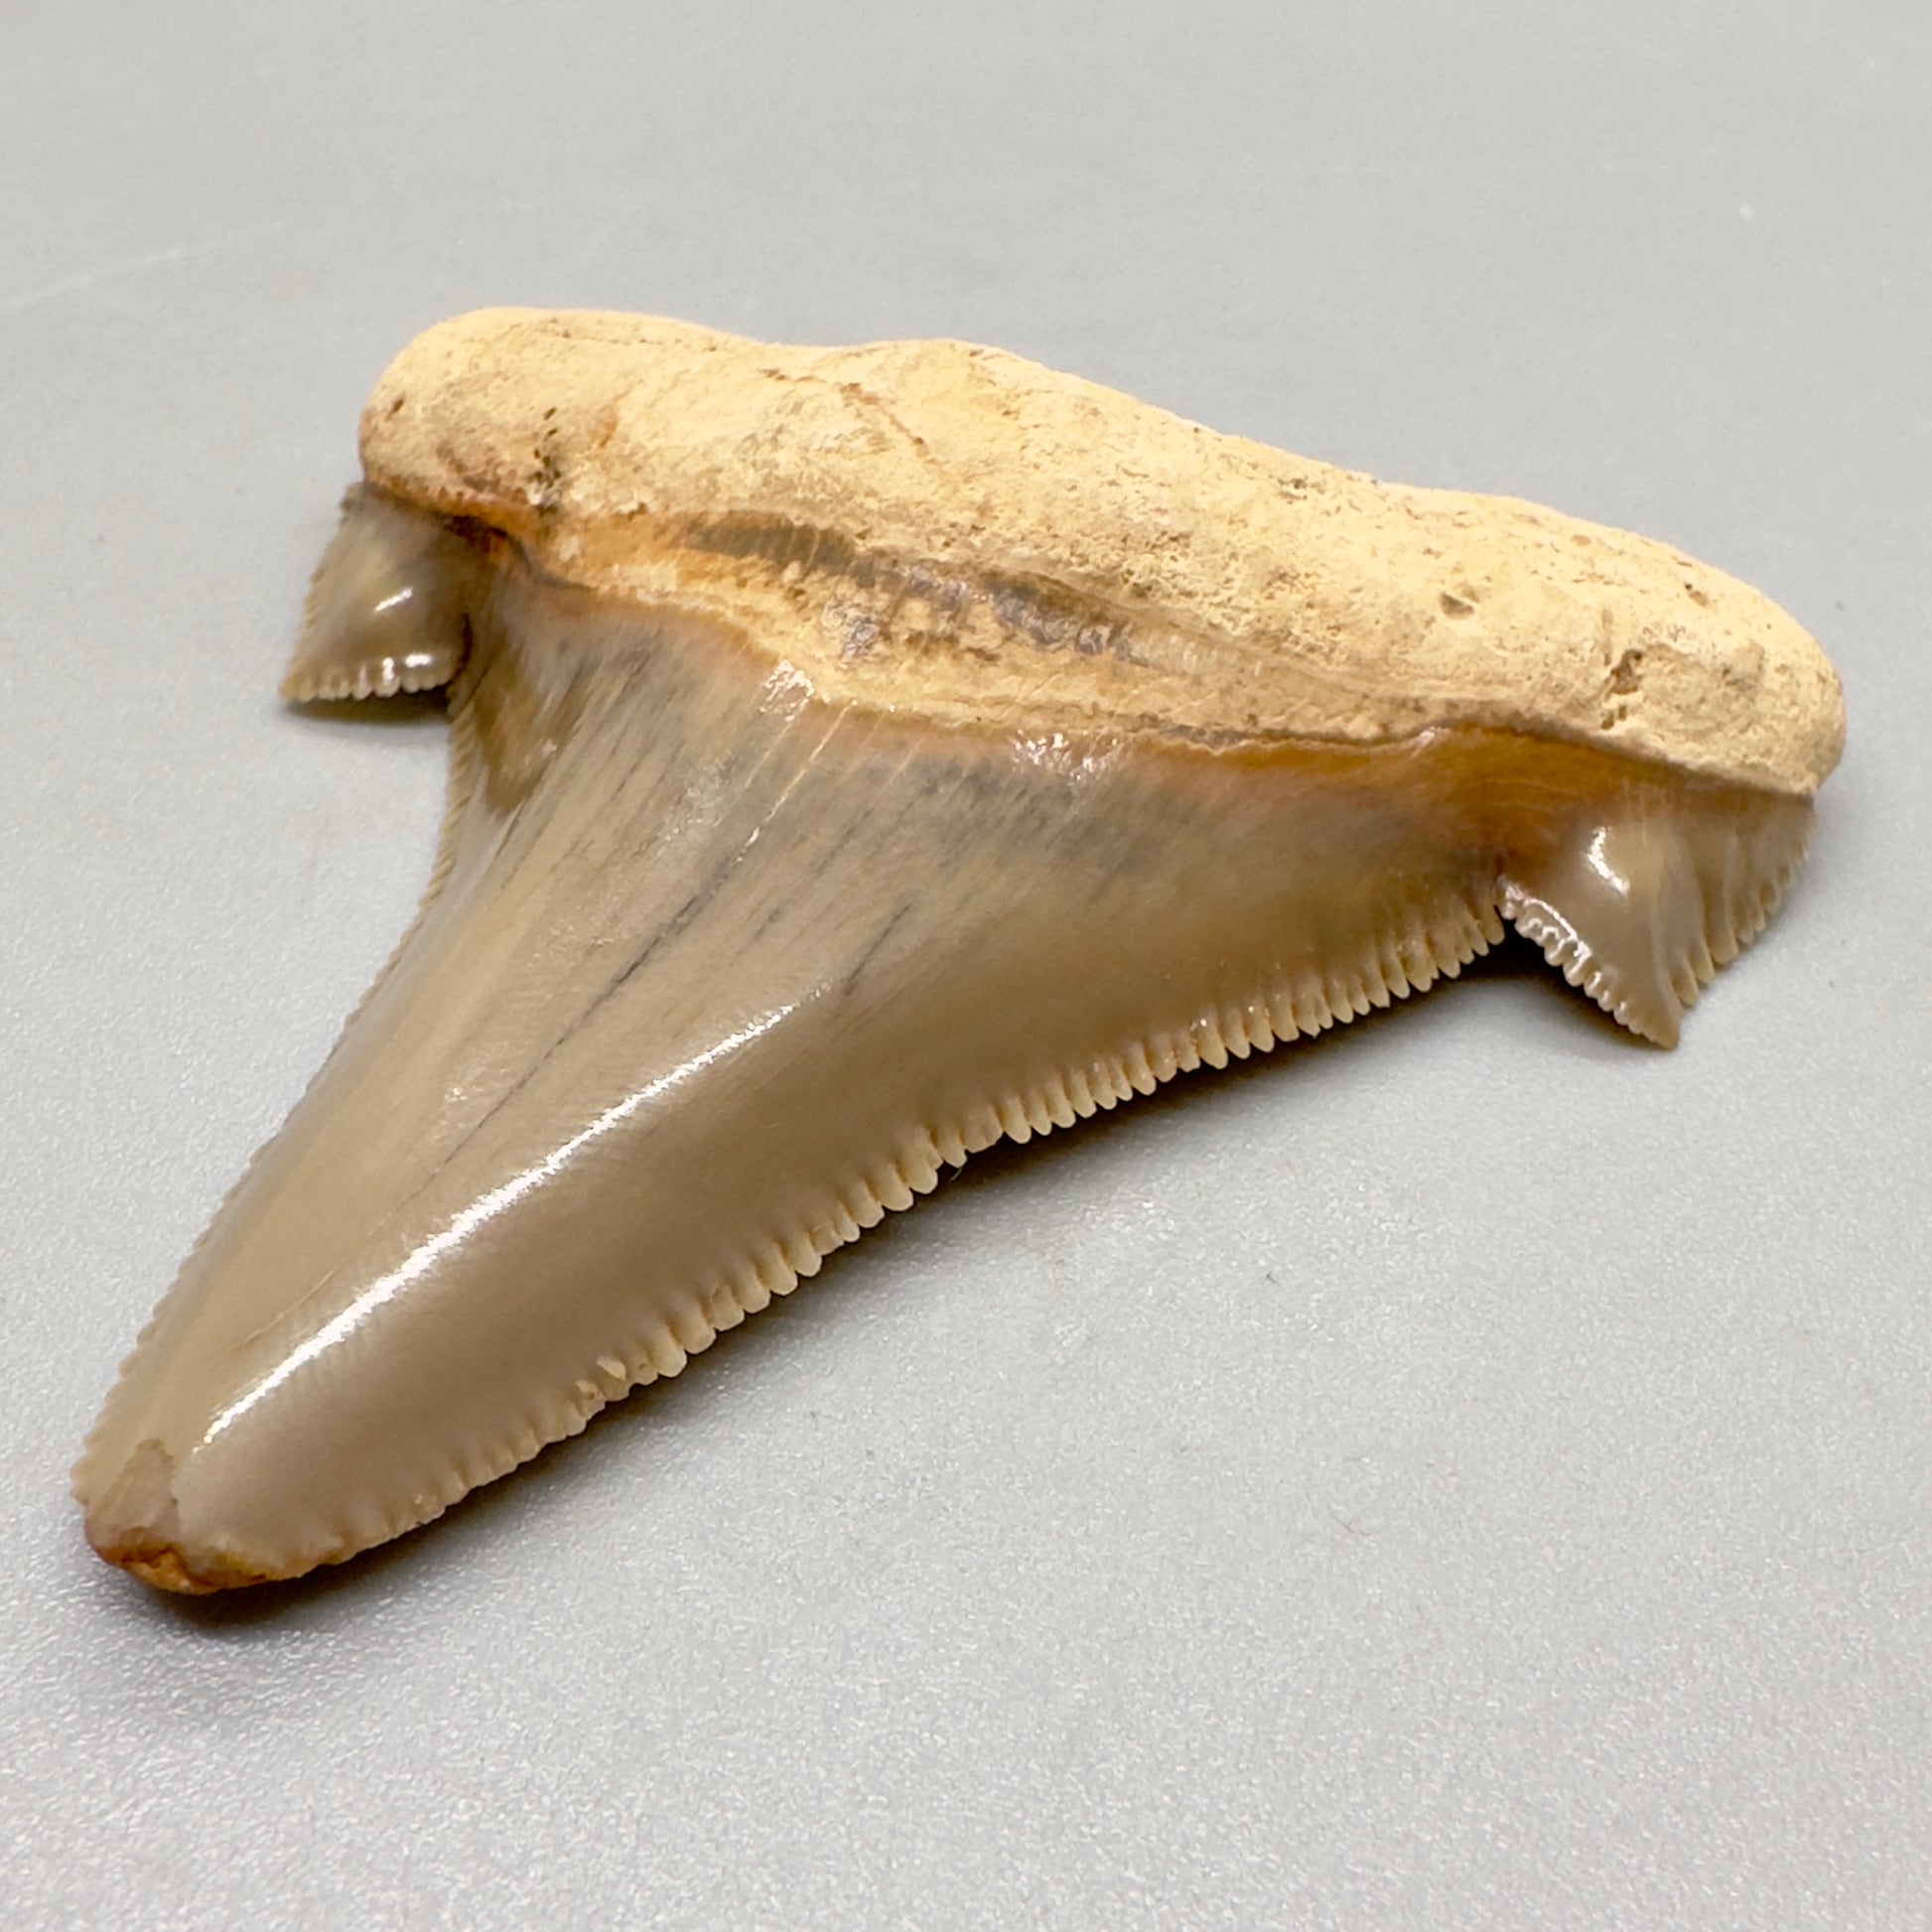 2.26 inches colorful serrated Carcharocles angustidens shark tooth from Summerville South Carolina AN409 front right